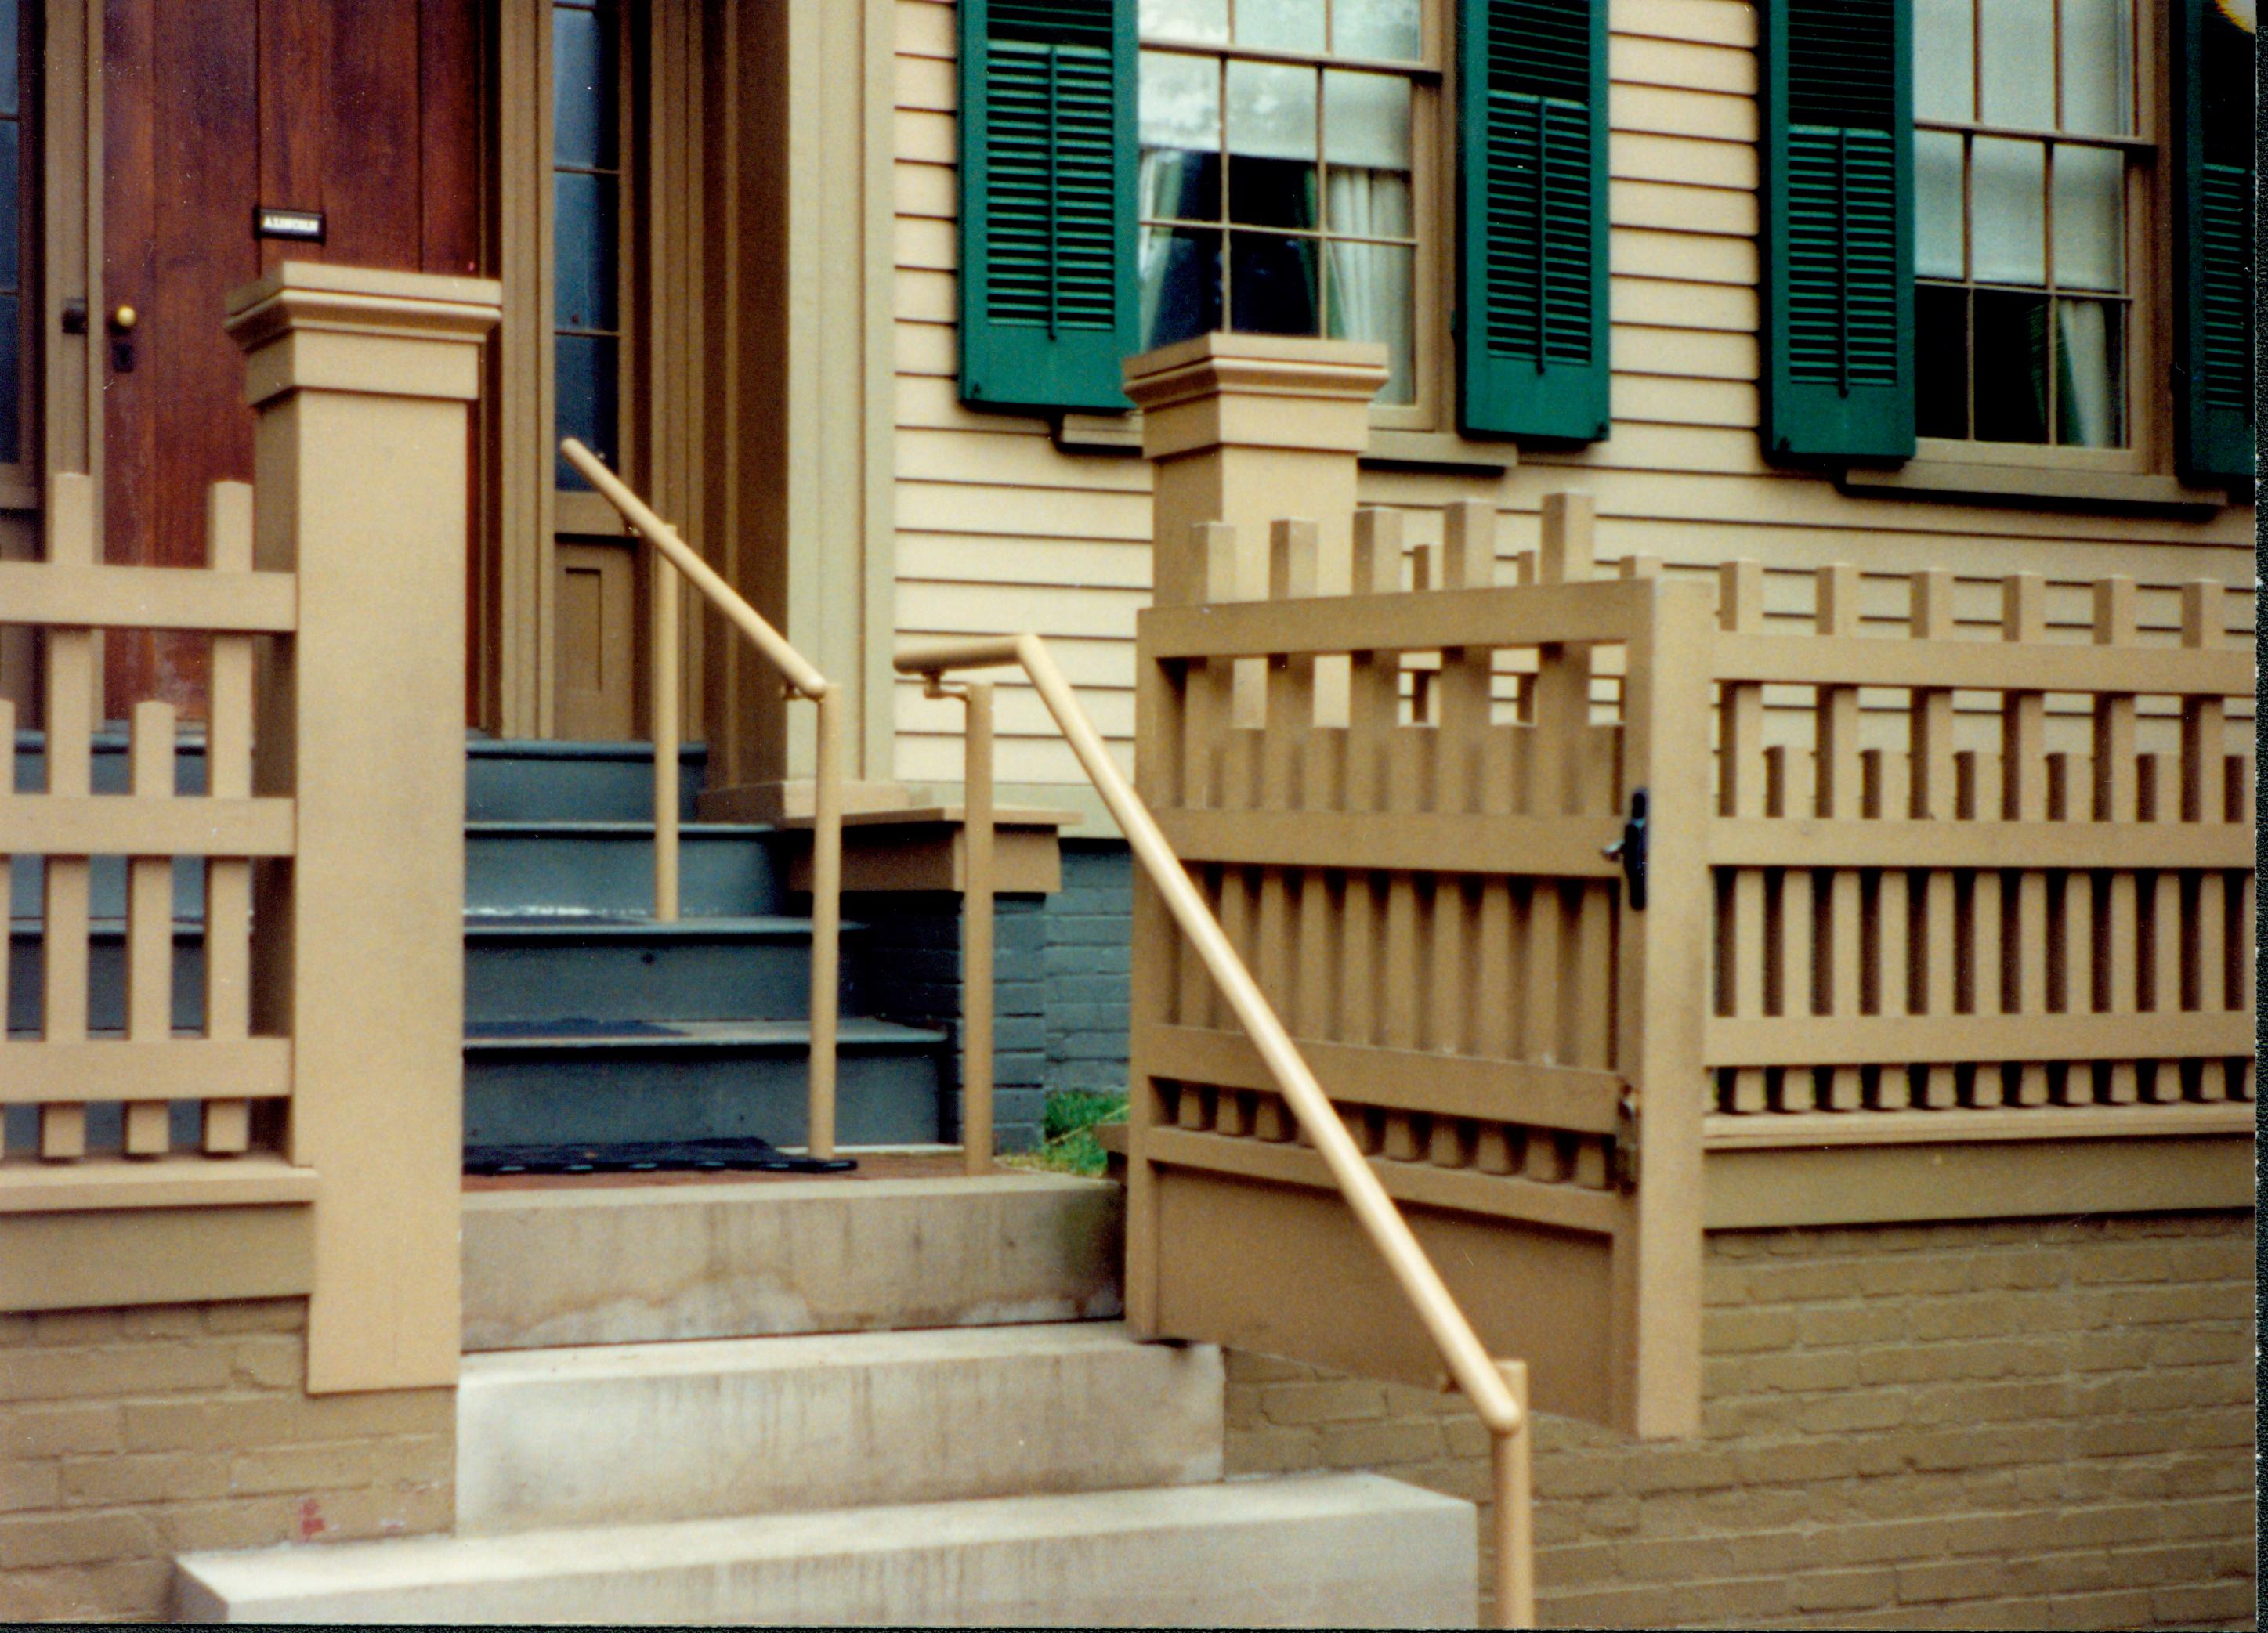 The front gate and handrails of the Lincoln Home, post-1990. Photographer facing south east.